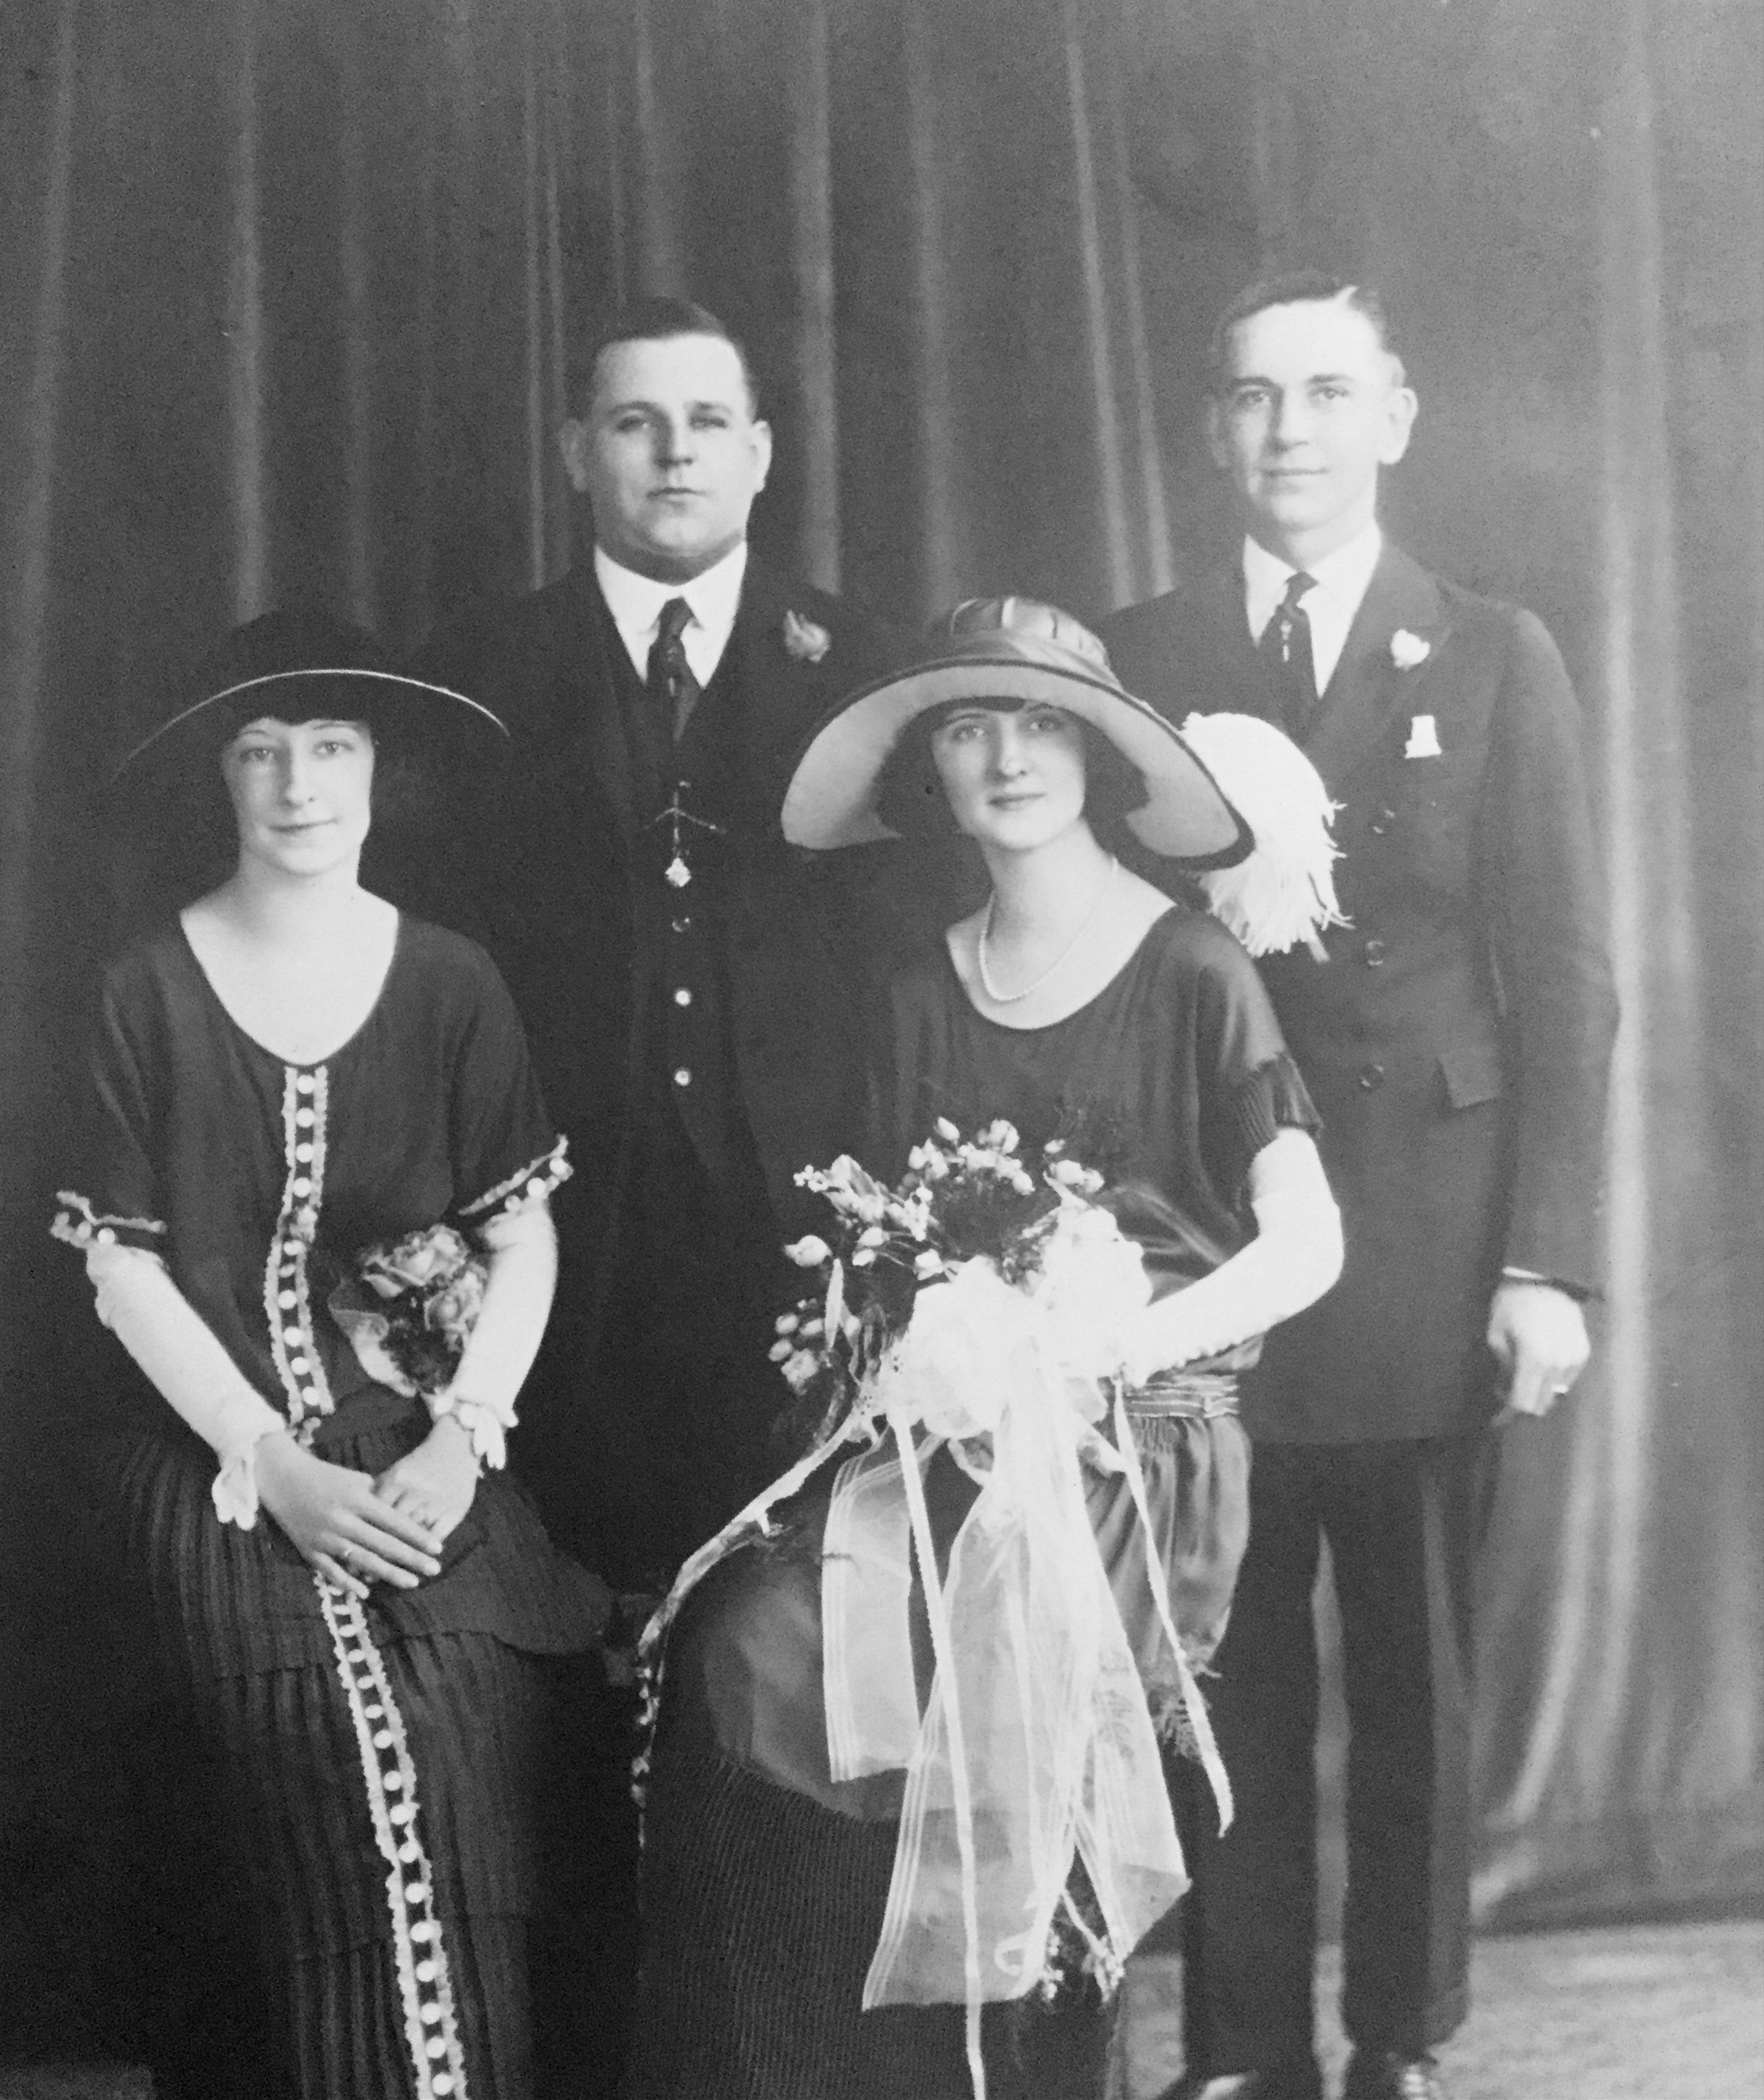 Wedding Day - September 18, 1923
Murrell Earnest and Rosellen  Catherine Murphy Gibby
(Son of John and Laura Taylor Gibby, 1900-1961)
